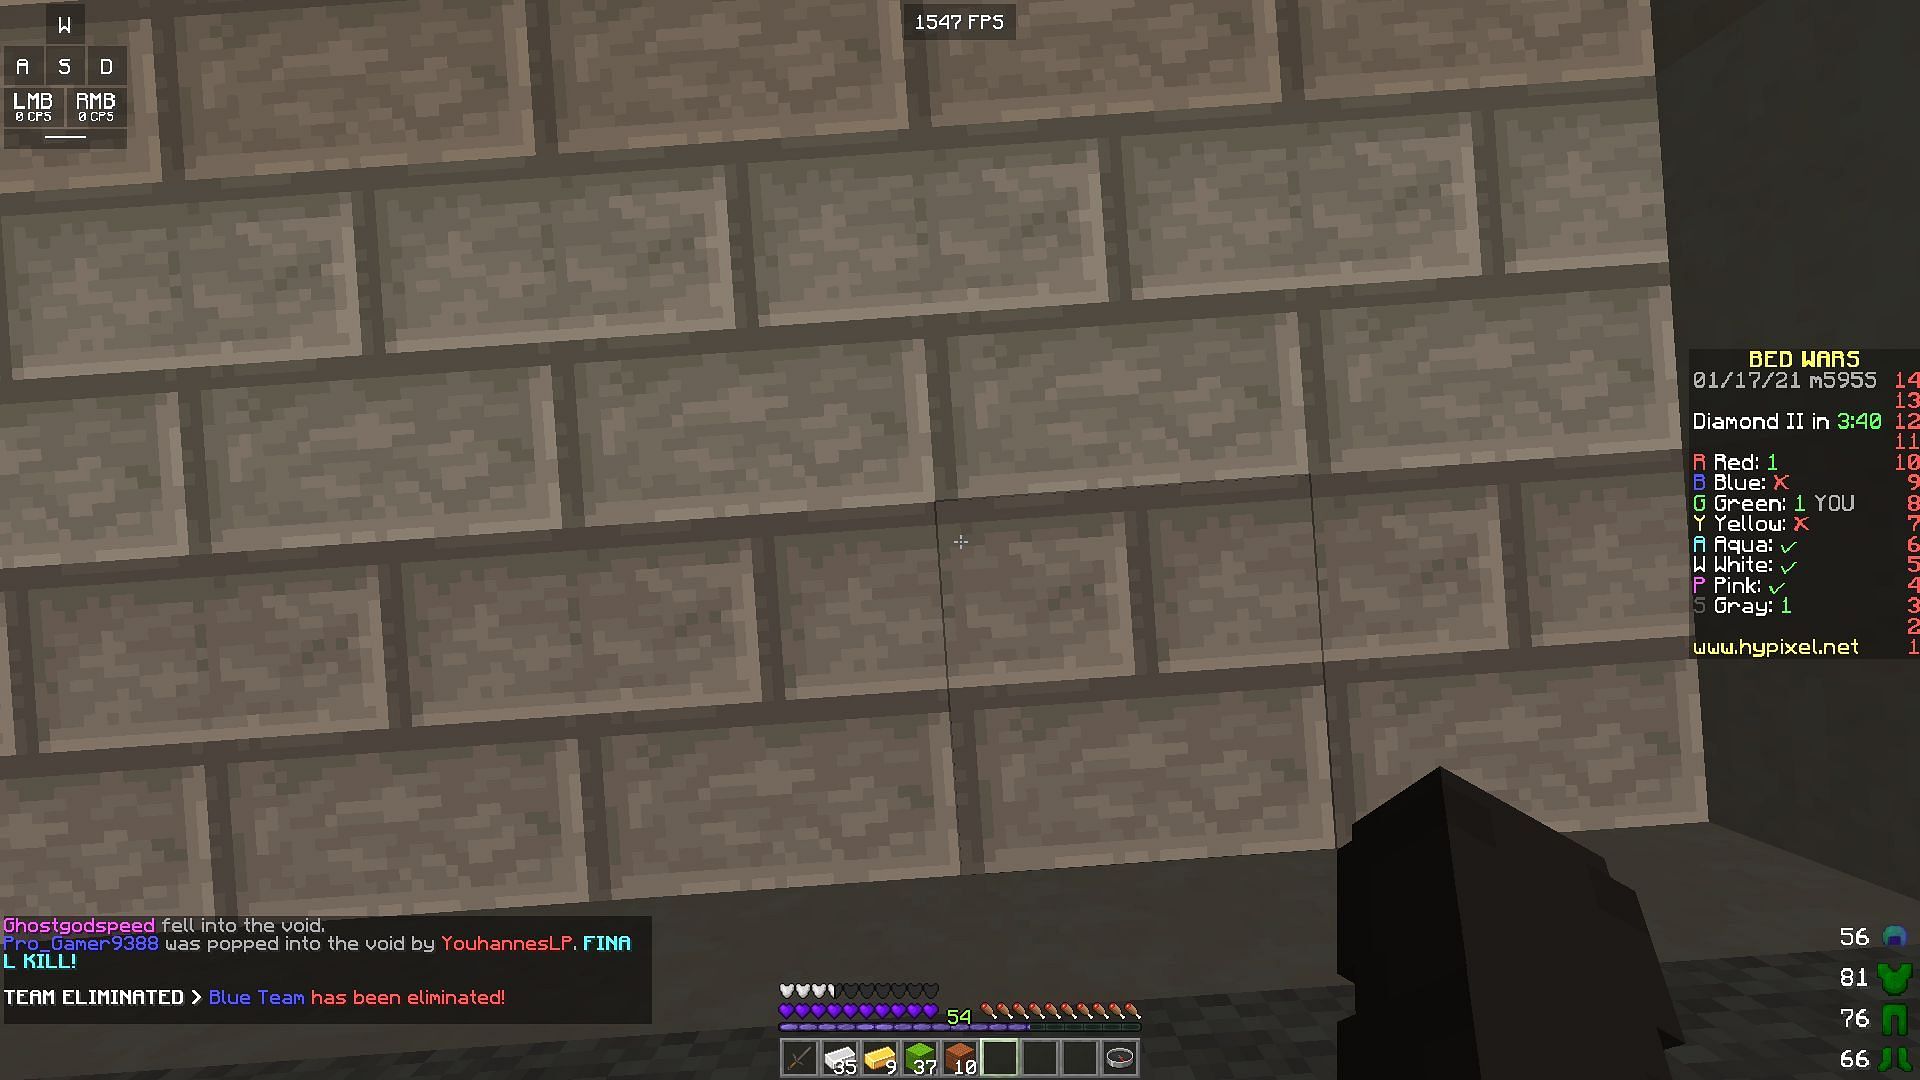 A player checks their FPS on the Hypixel server (Image via Hypixel.net)